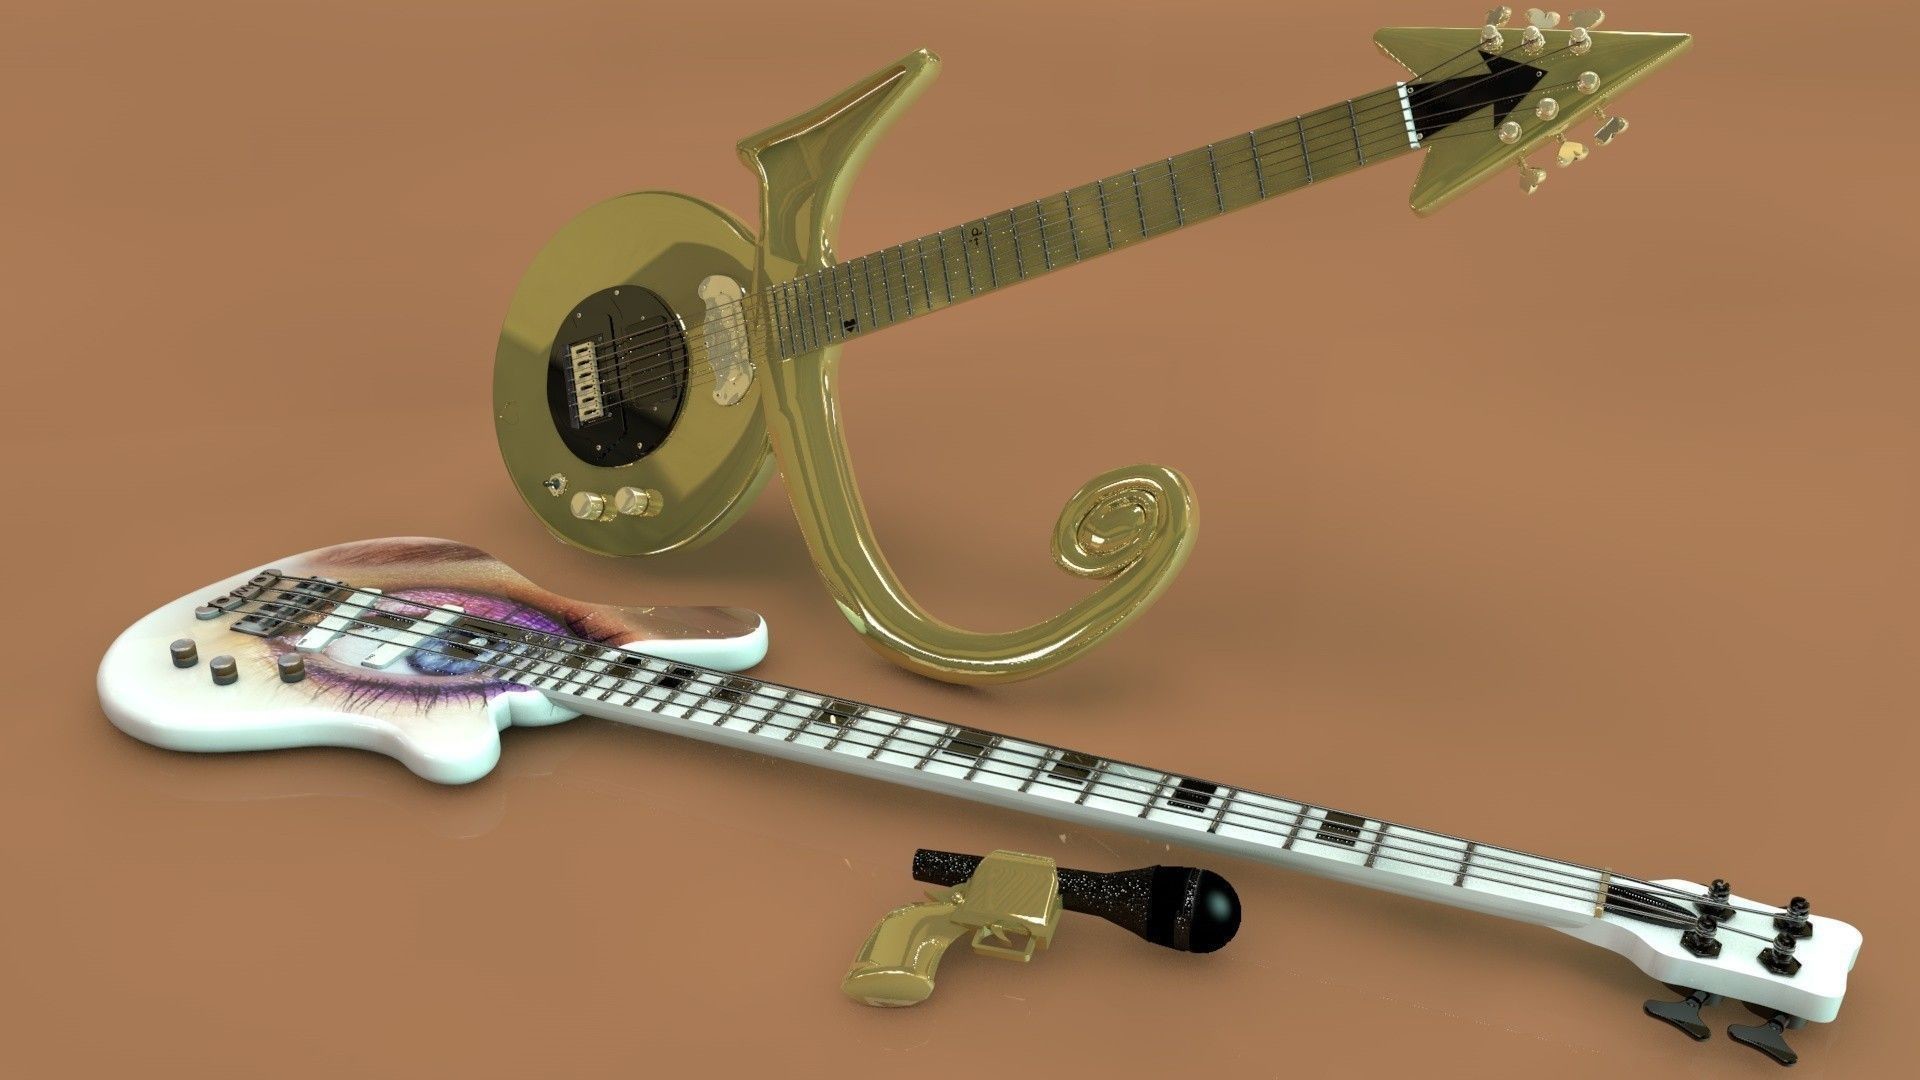 Prince symbol guitar and eye bass 3d model obj 3ds c4d dxf 3